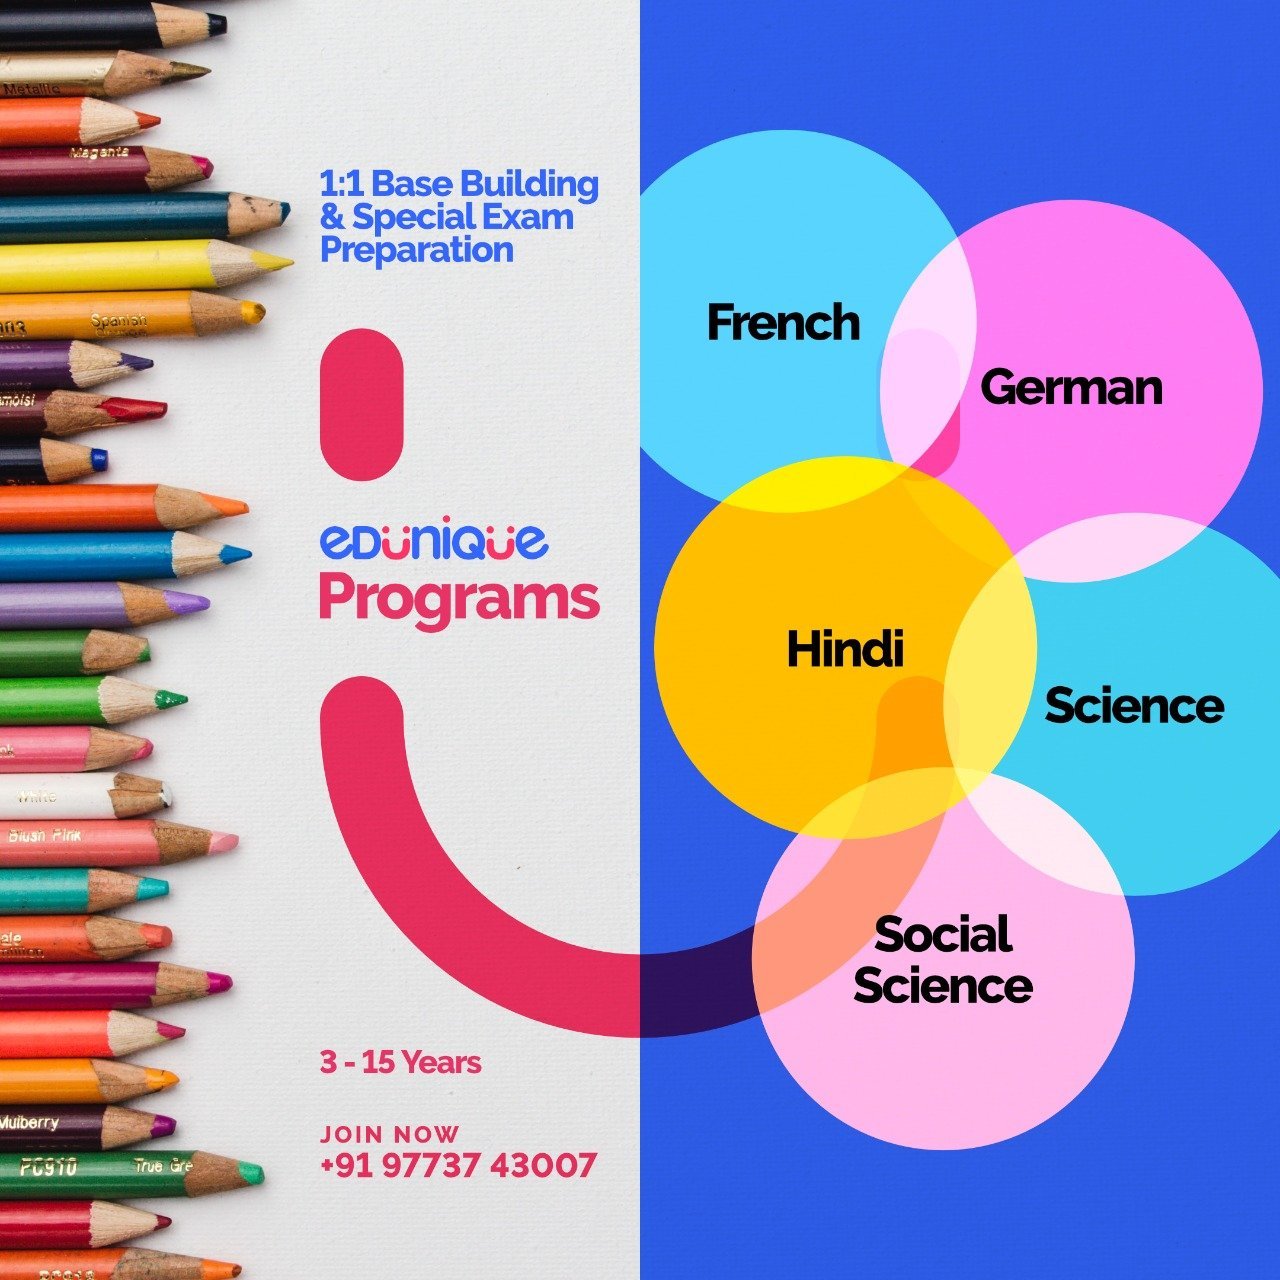 edunique, personality development course free, online spoken english free classes, handwriting improvement course, artificial intelligence class 9, free coding for kids, online chess classes, scratch programming online, math classes online, 9 class science, english class 7th, online spoken english free classes